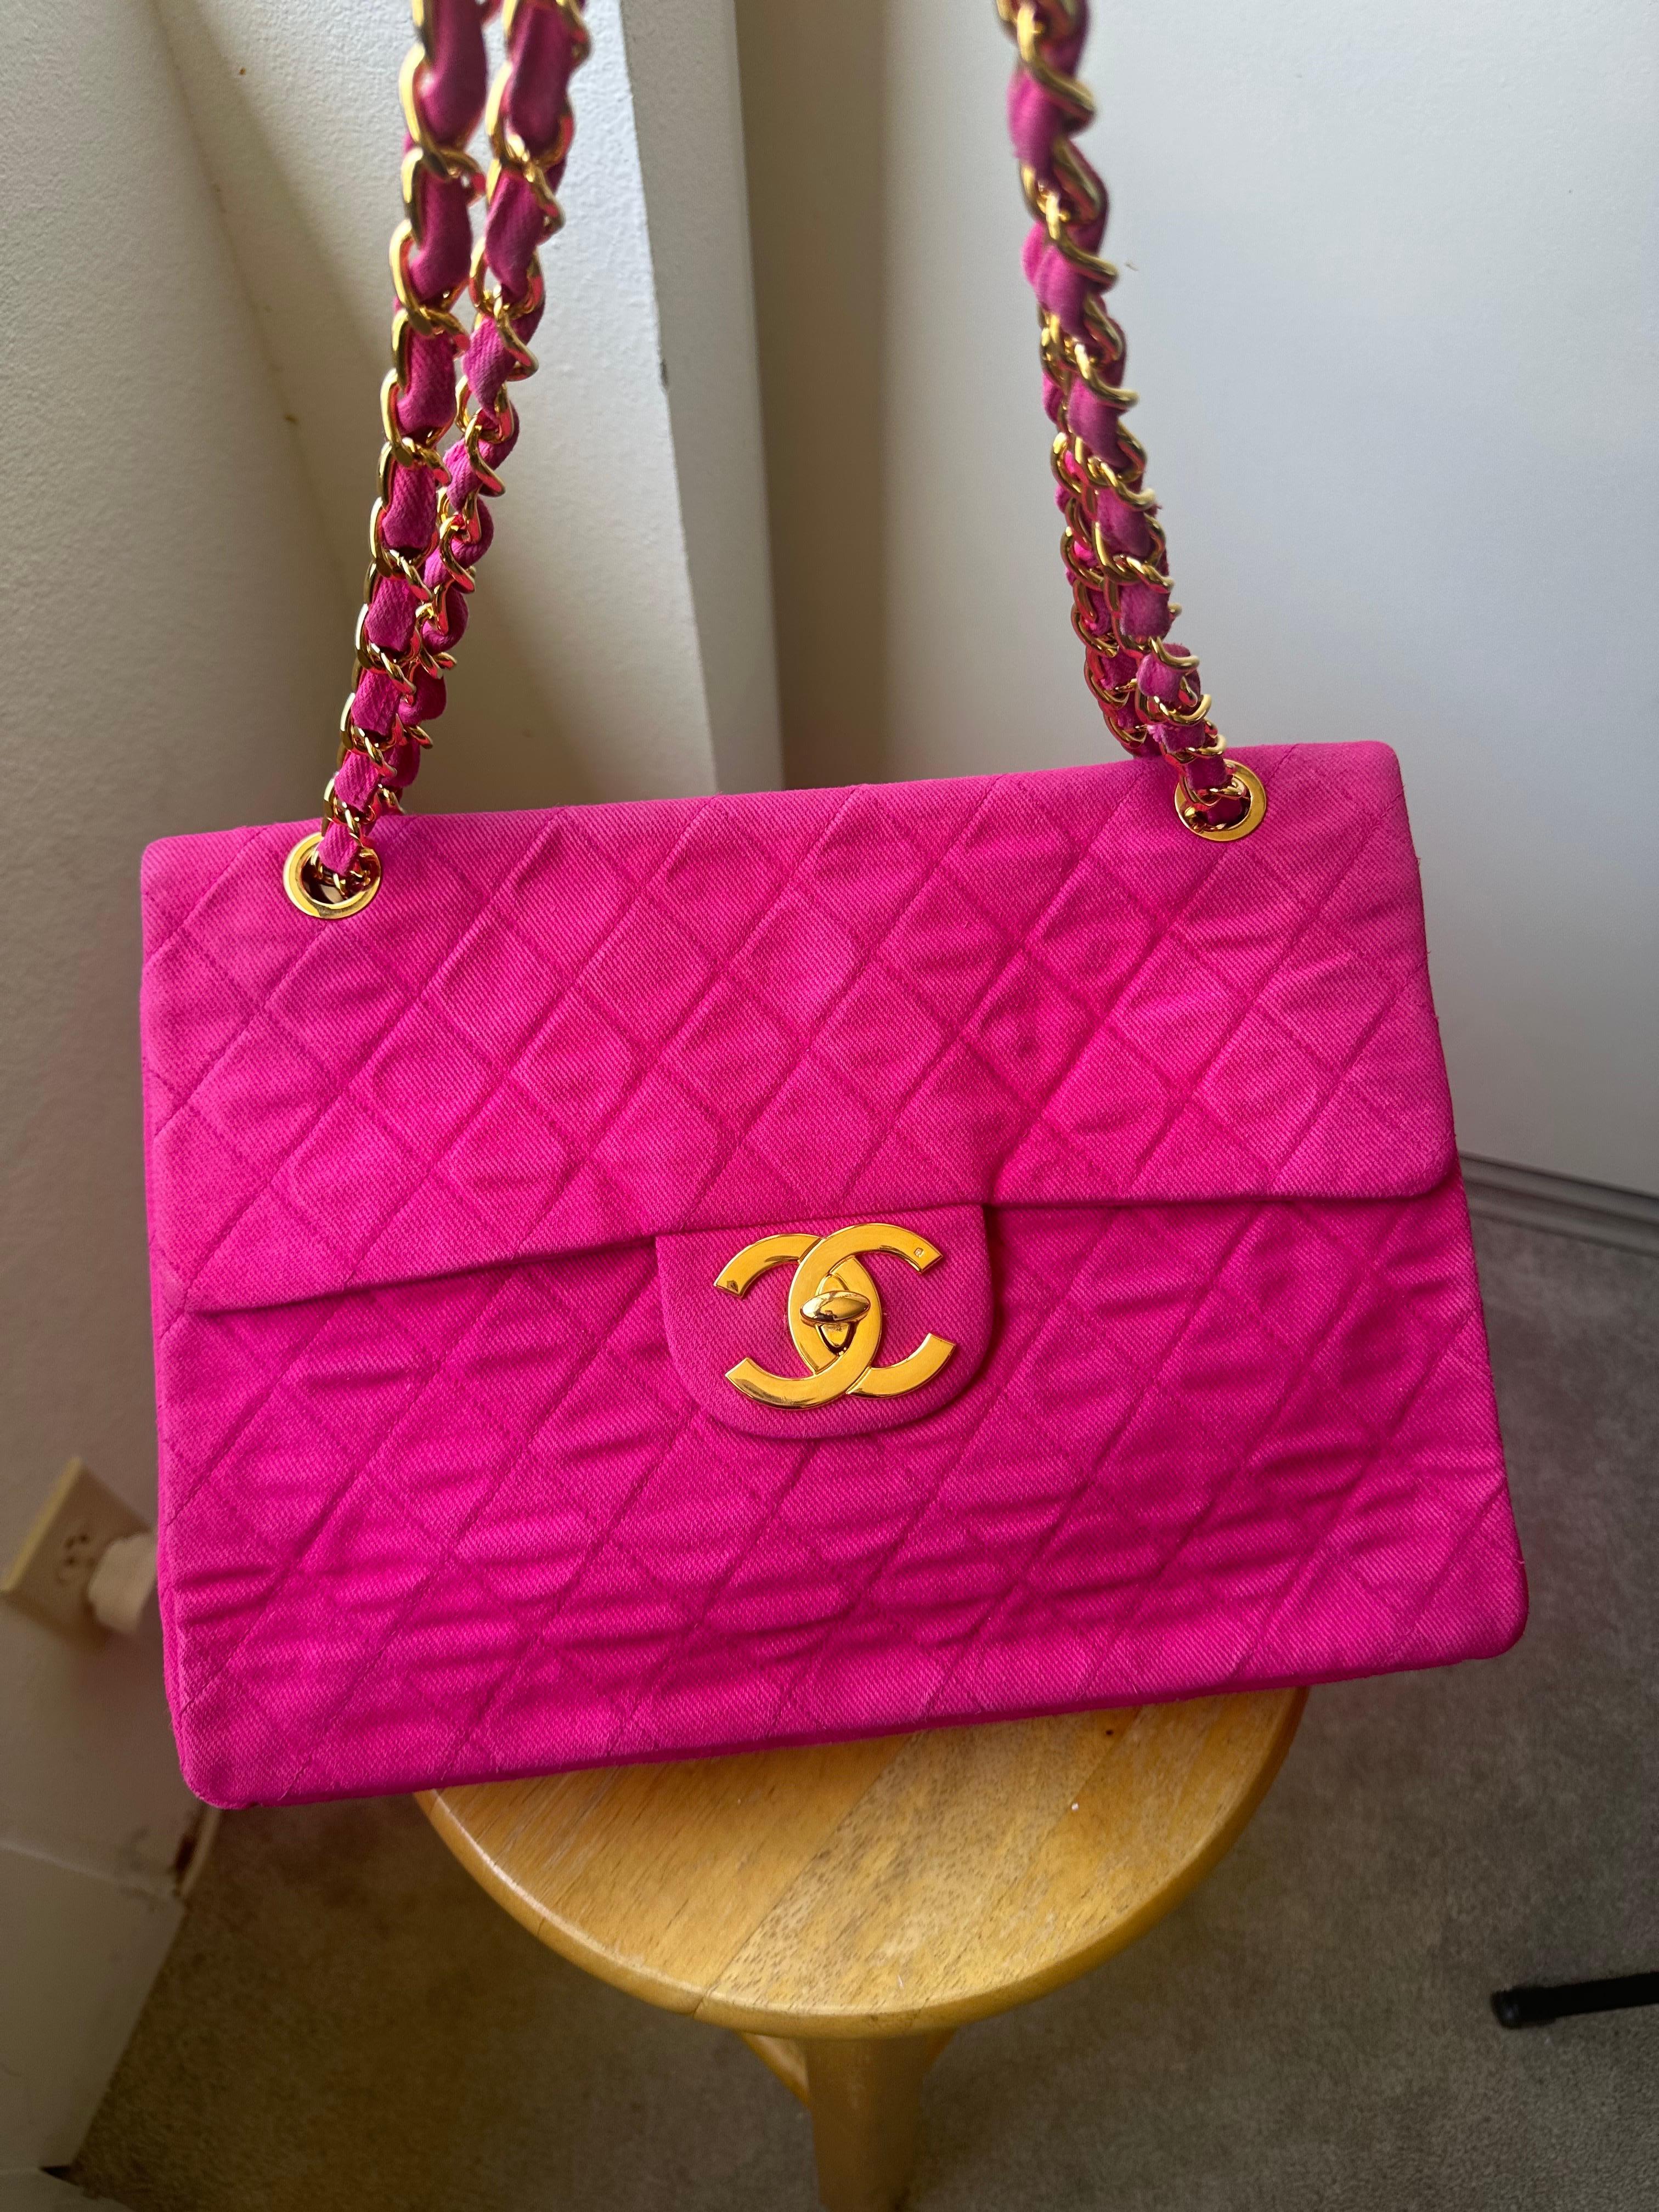 Chanel Vintage Hot Pink Denim Maxi In Fair Condition For Sale In Honolulu, HI